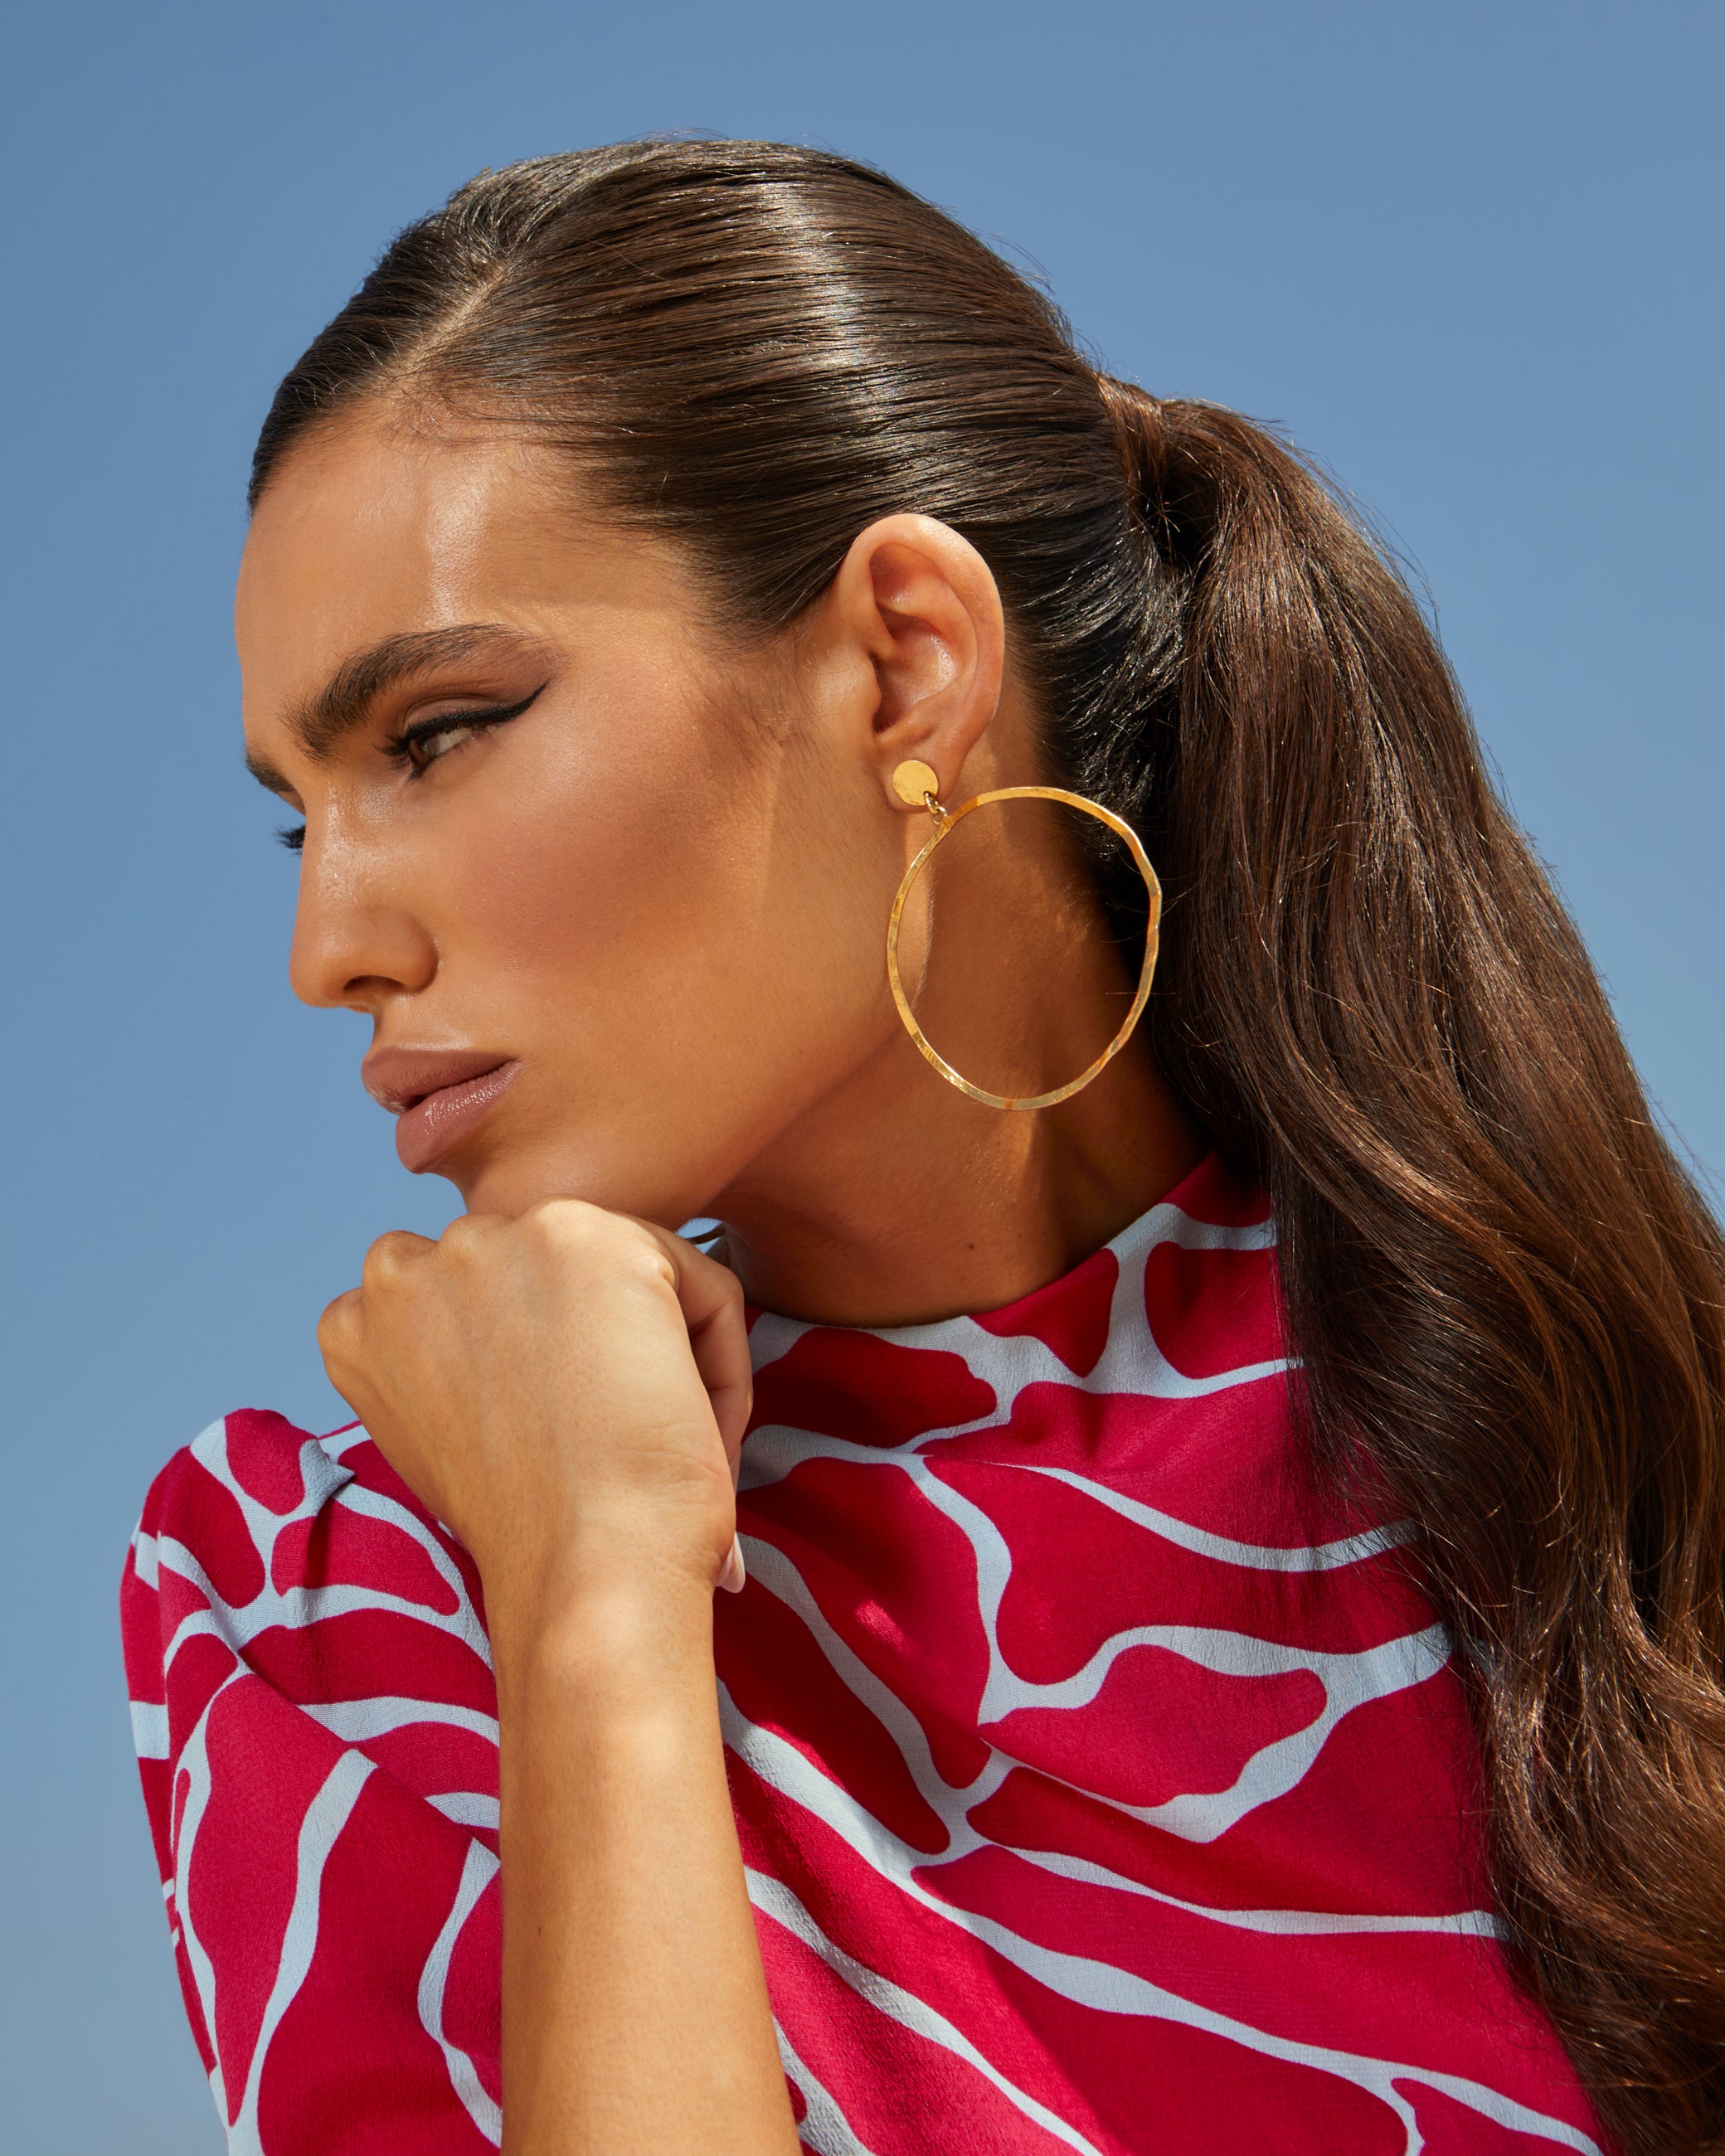 Rocío Gold Earrings by Malababa